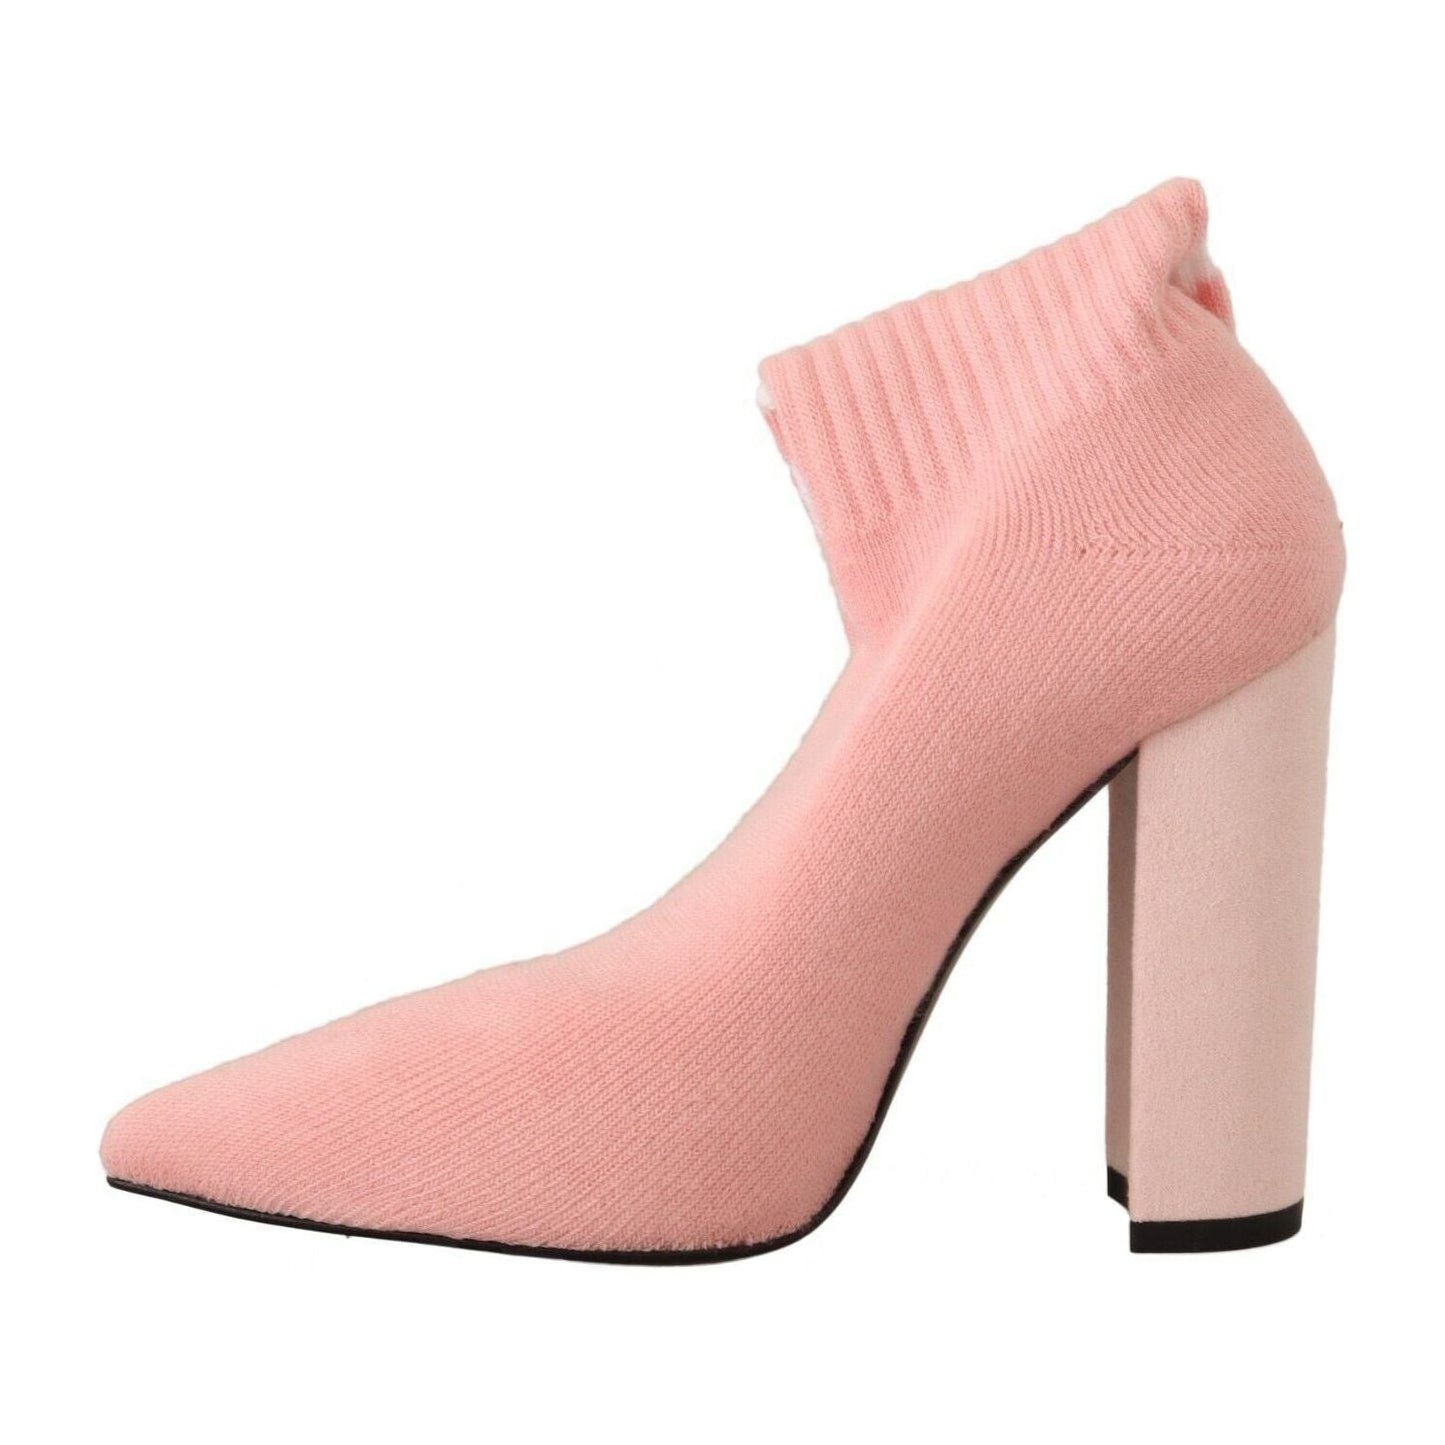 GCDS Chic Pink Suede Ankle Boots with Logo Socks pink-suede-logo-socks-block-heel-ankle-boots-shoes s-l1600-3-162-638c6047-09b.jpg